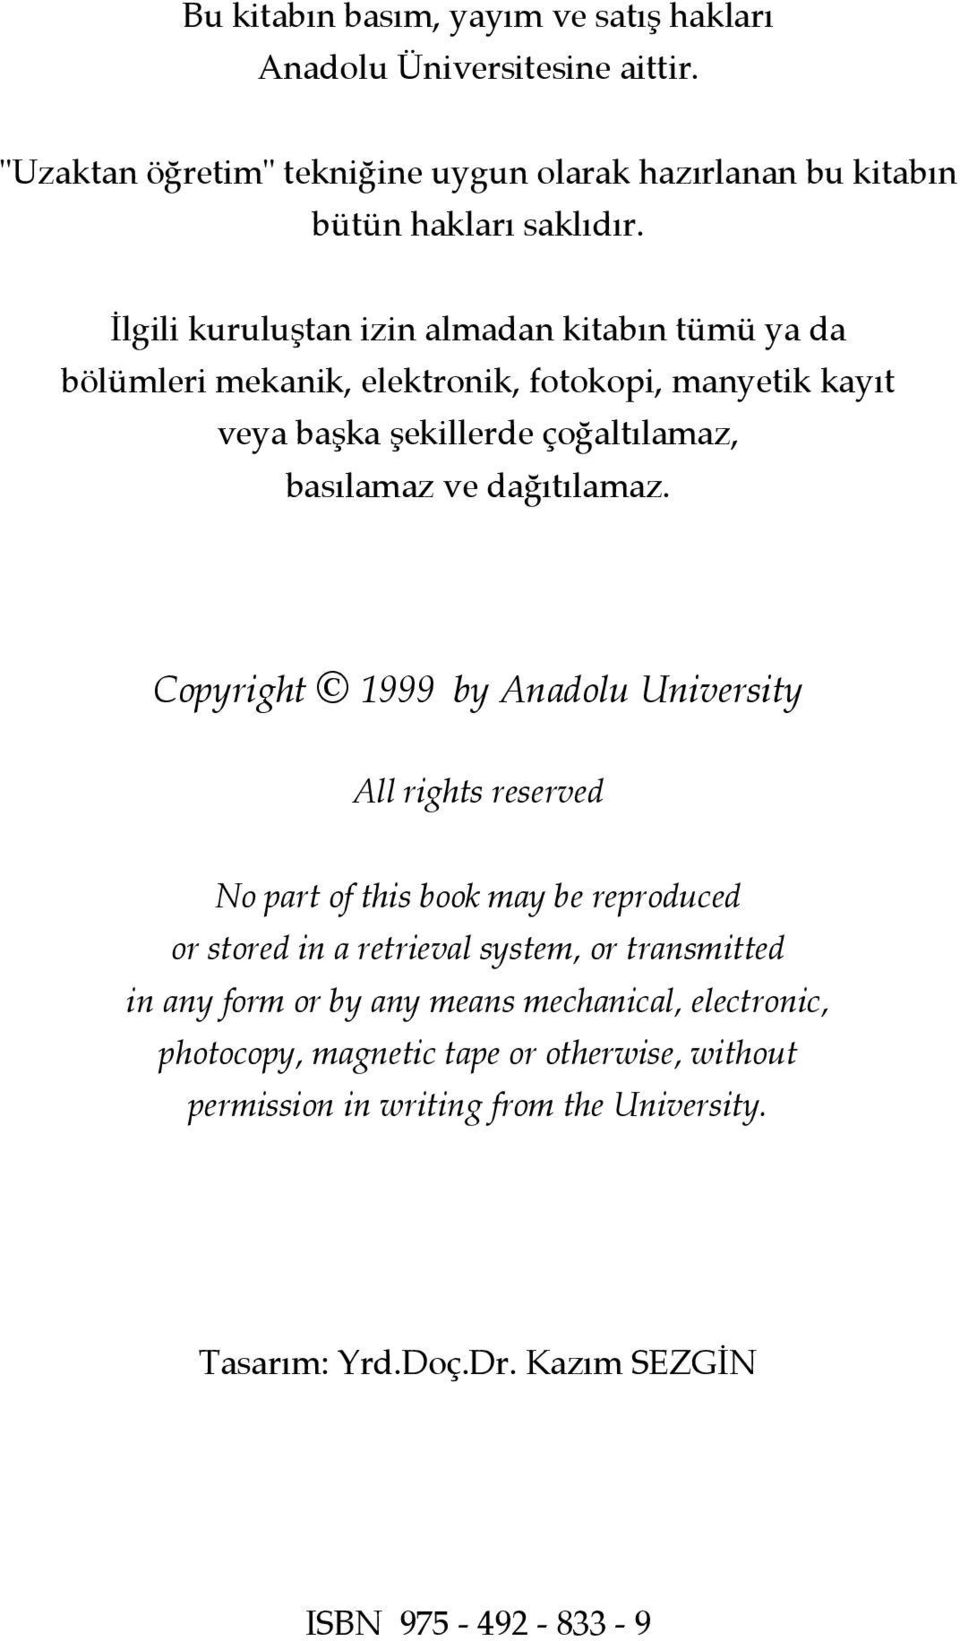 Copyright 1999 by Anadolu University All rights reserved No part of this book may be reproduced or stored in a retrieval system, or transmitted in any form or by any